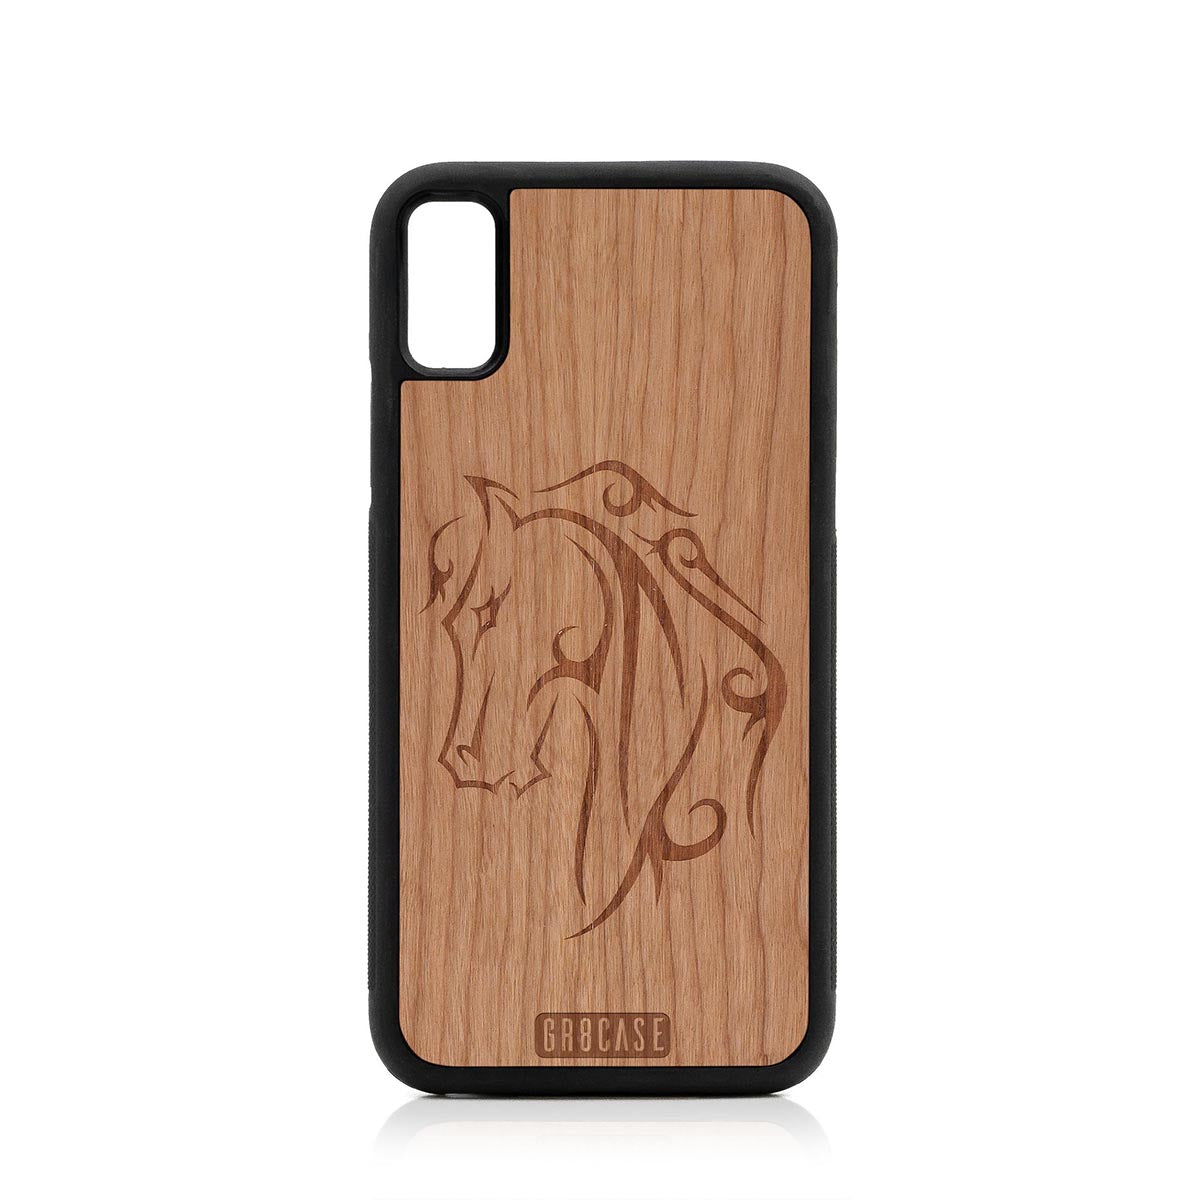 Horse Tattoo Design Wood Case For iPhone XR by GR8CASE